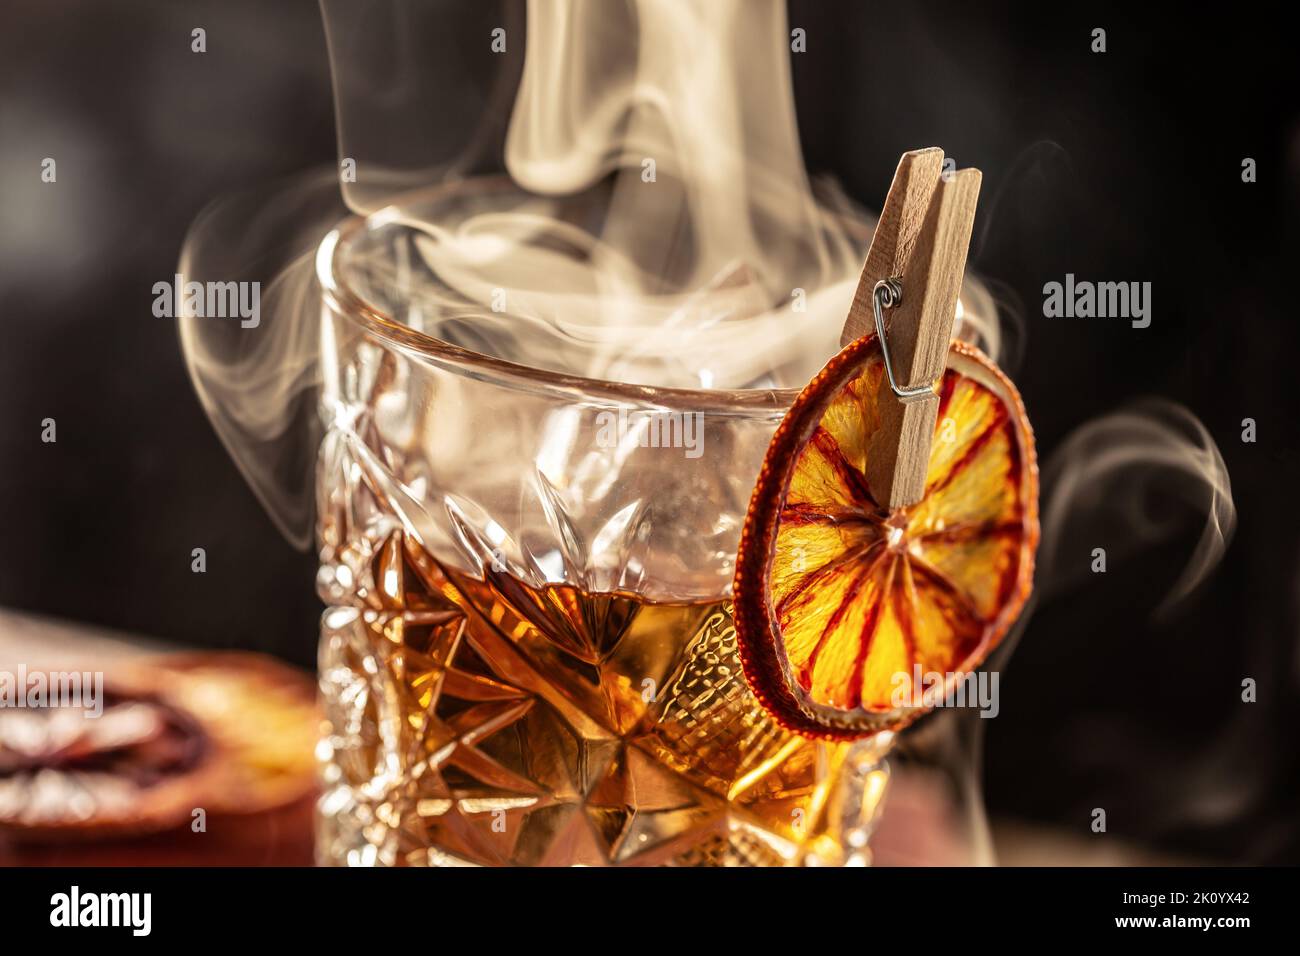 Smoked old fashioned rum cocktail with cubes of ice around on a dark background. Stock Photo